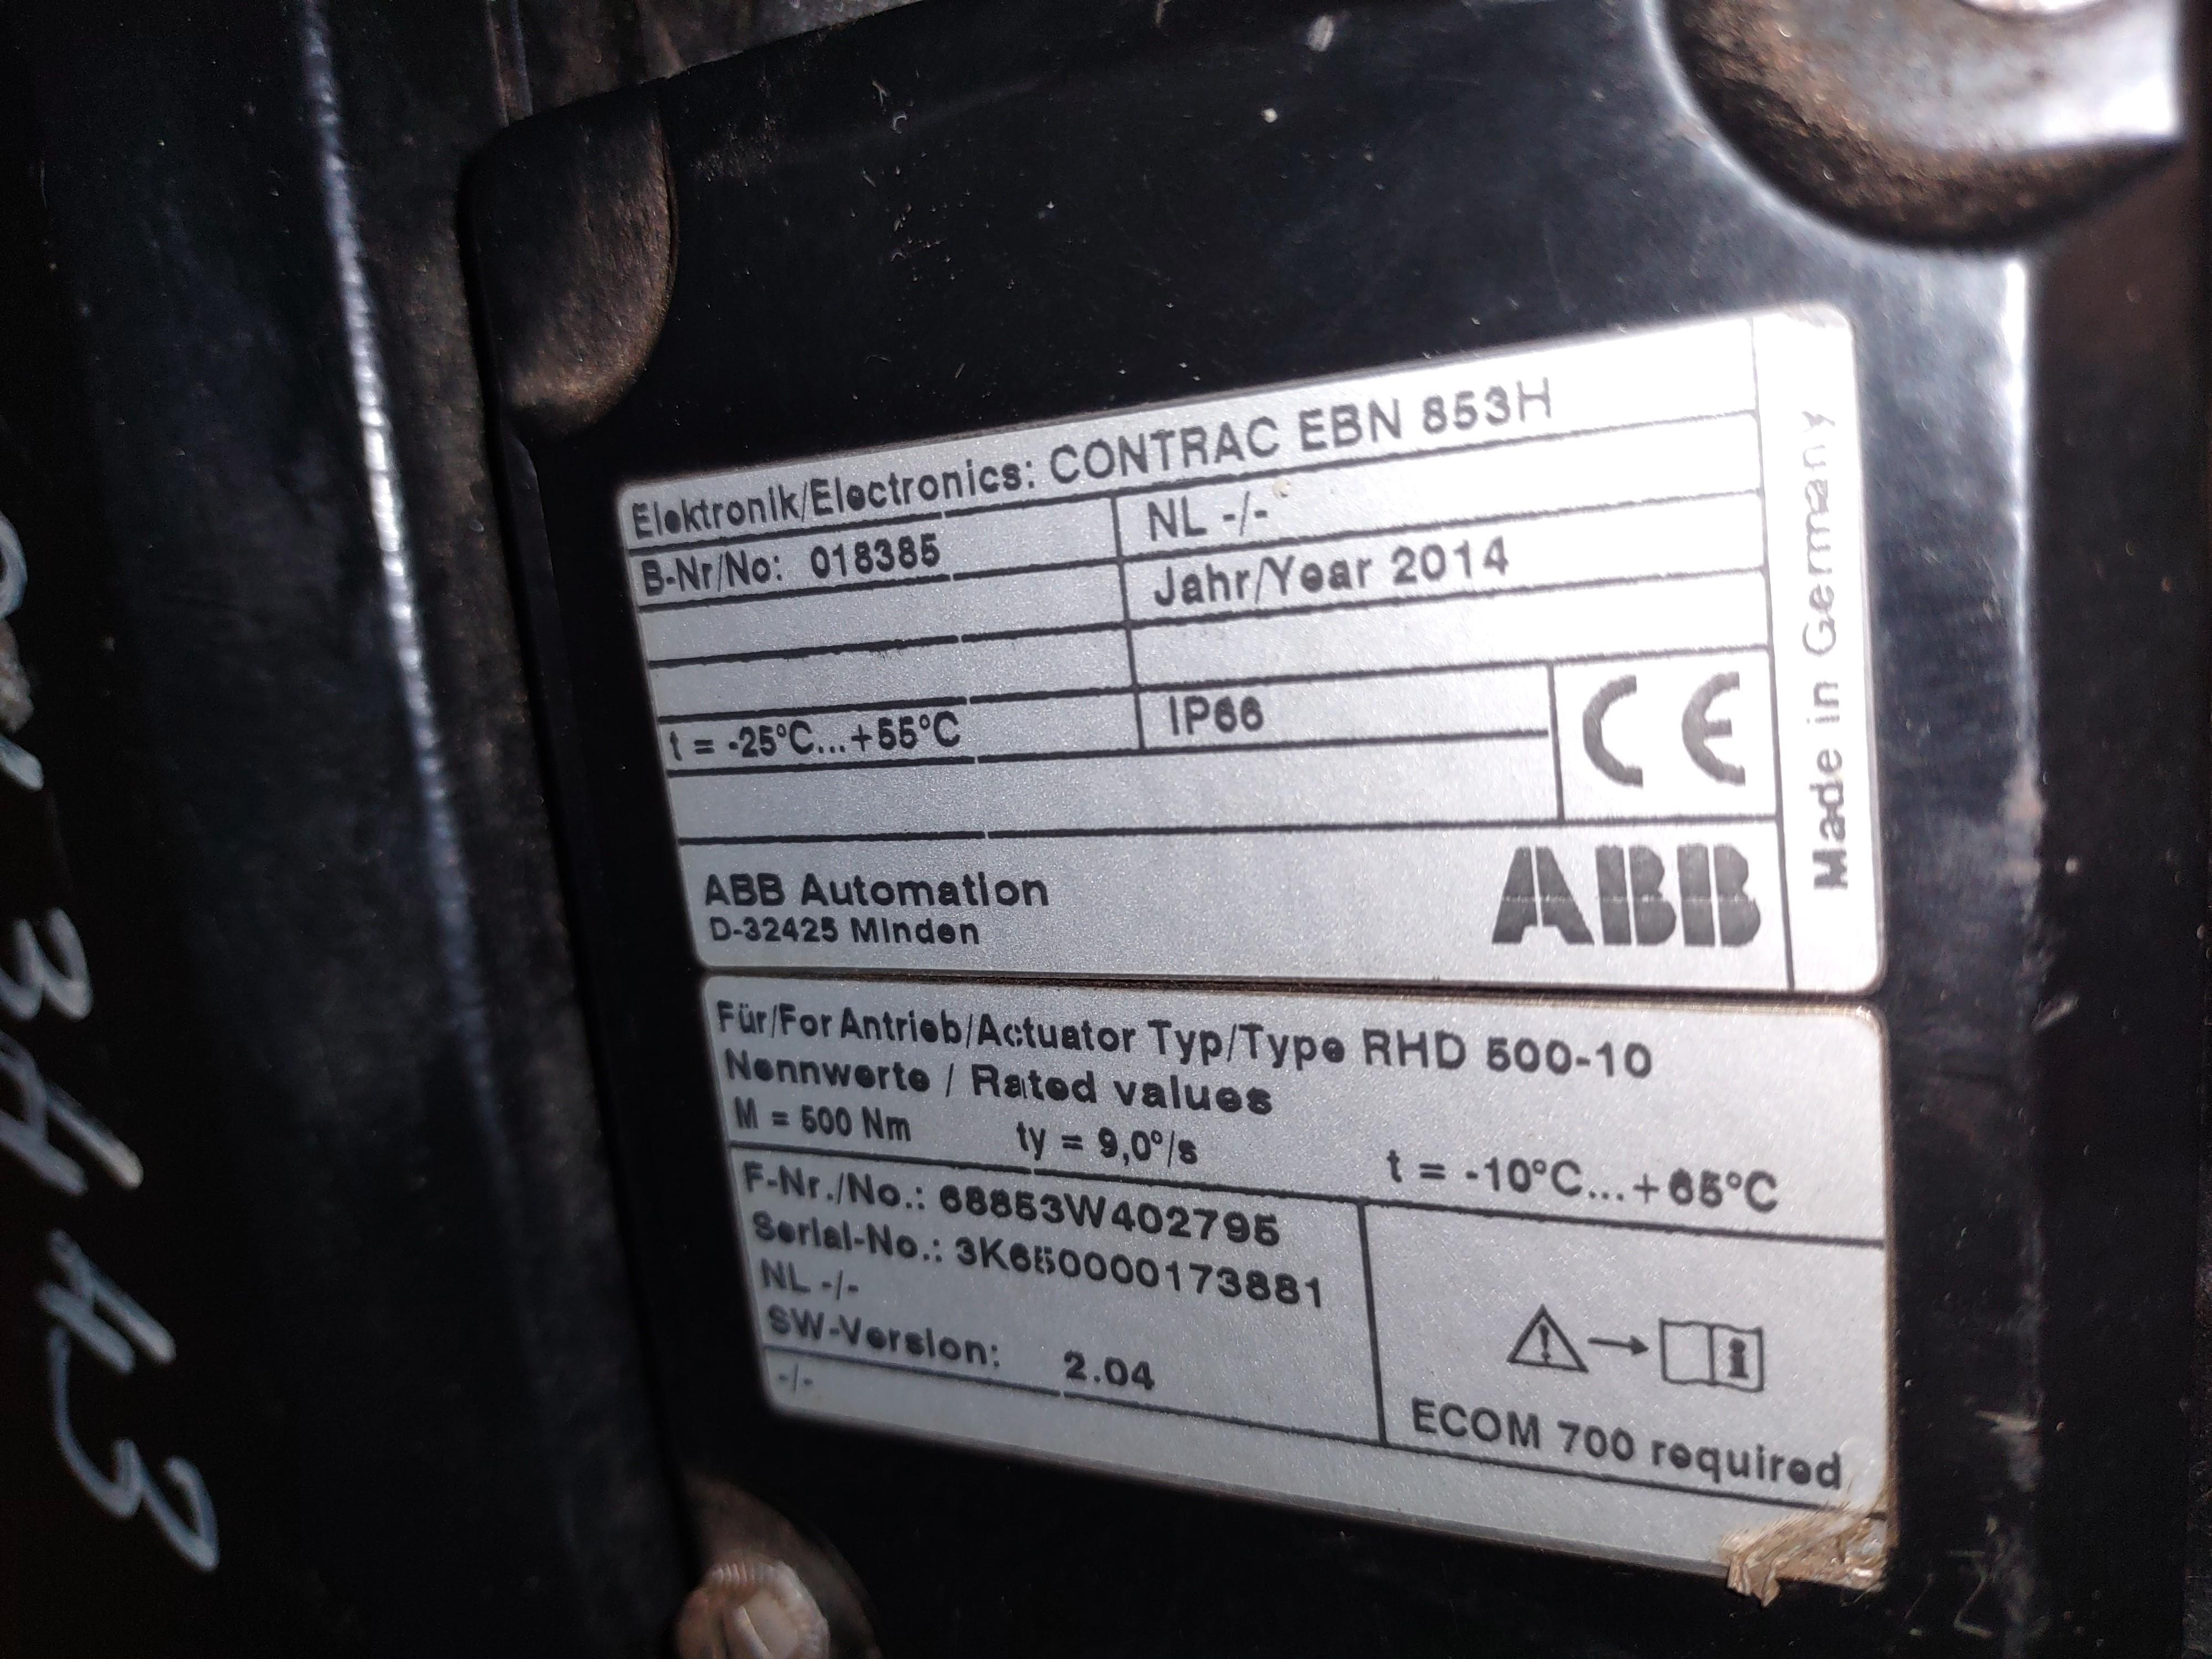 ABB RHD 500-10 Actuator With EBN 853H Electronics Contrac